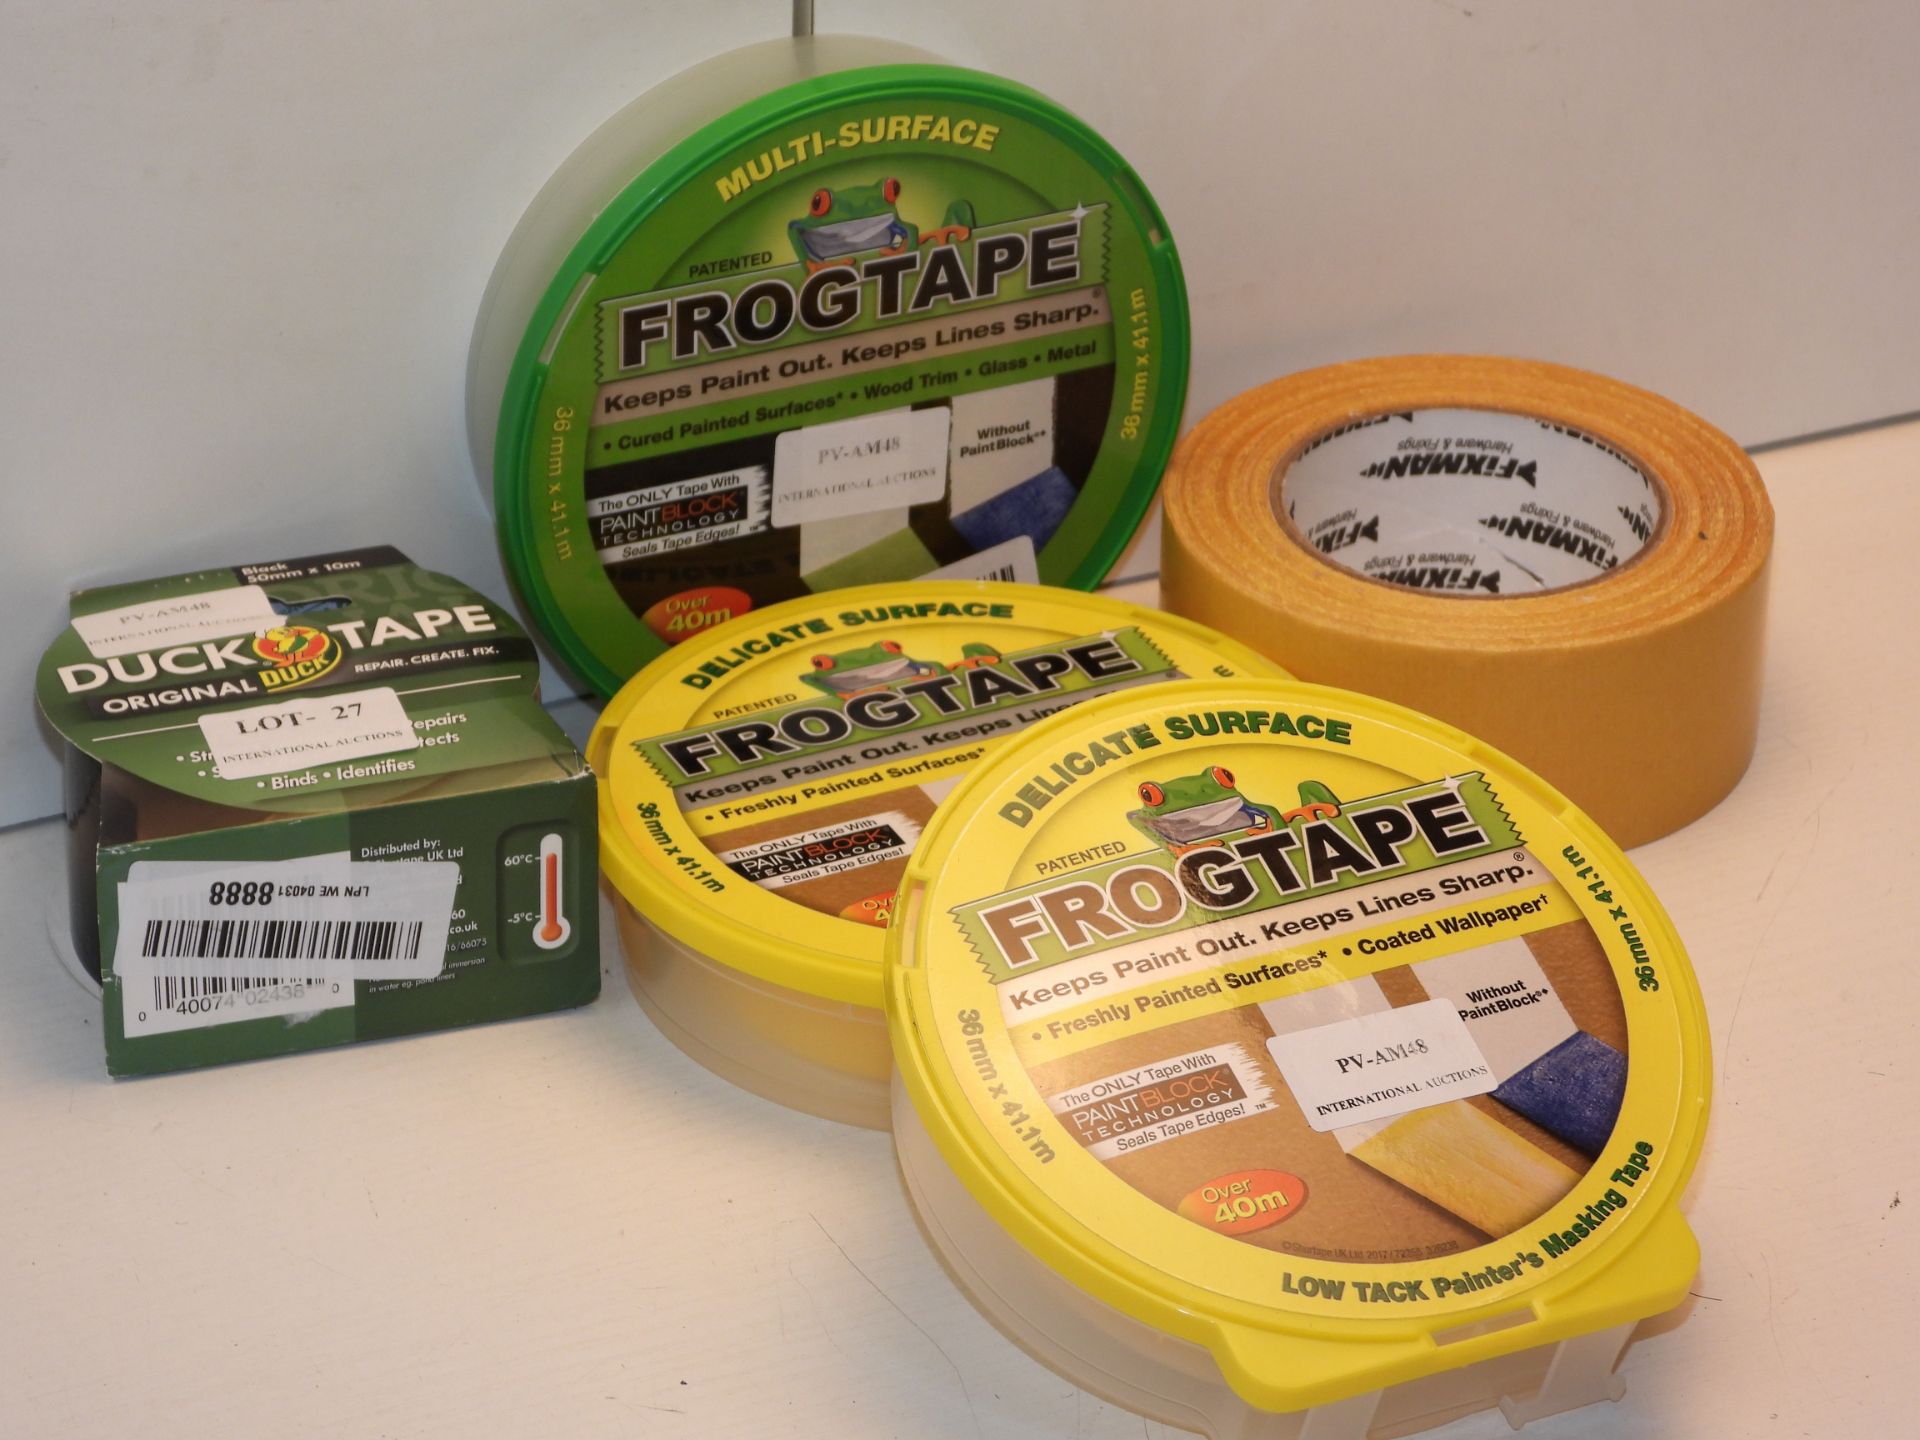 5X ASSORTED ROLLS TAPE TO INCLUDE DUCKTAPE, FROGTAPE & OTHER (IMAGE DEPICTS STOCK)Condition